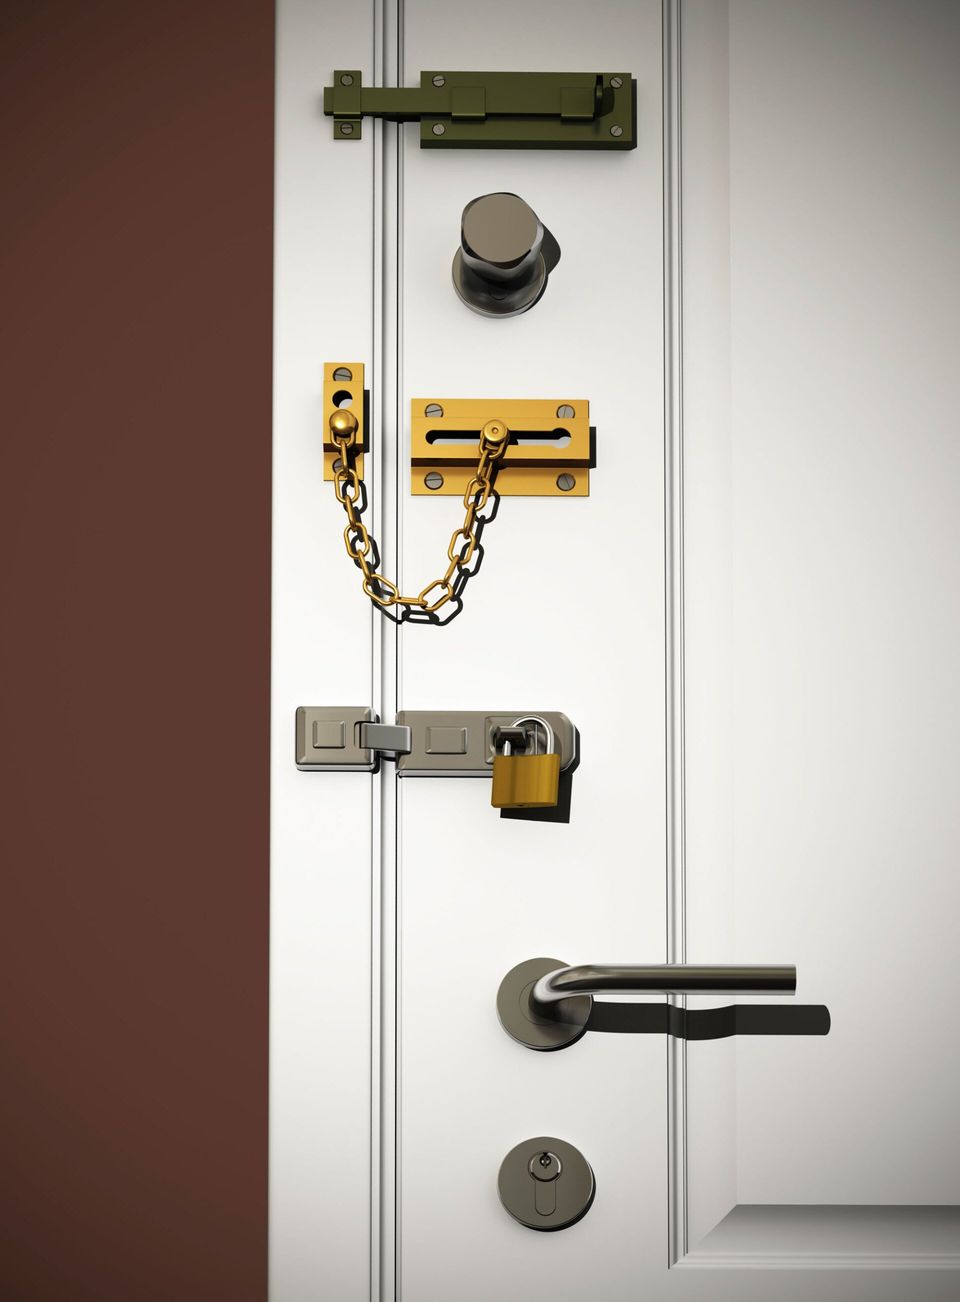 Smart Door Lock vs. Traditional: Which Is the Best Choice for Your